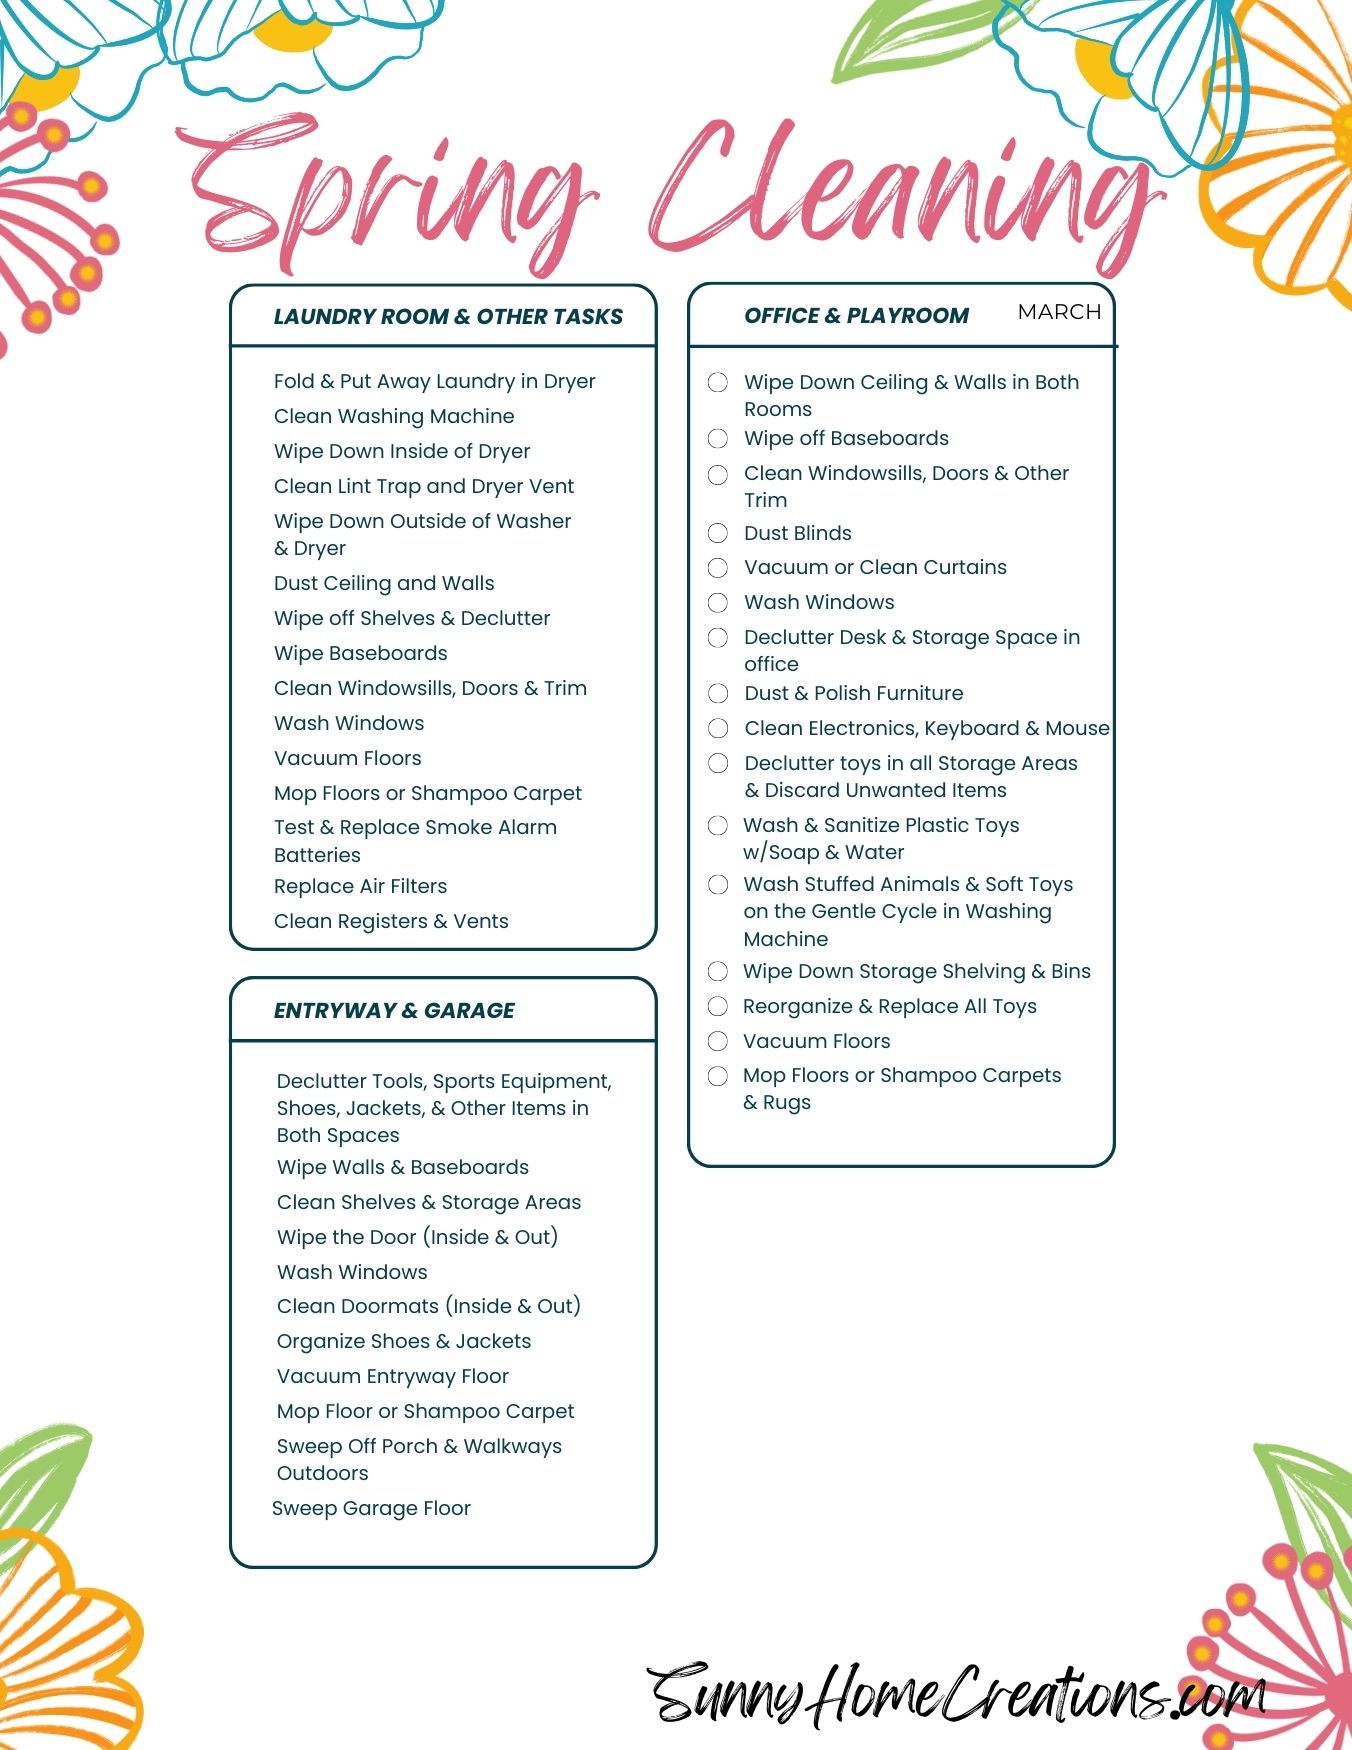 Spring cleaning printable checklist for laundry room, office, playroom, entryway and garage.